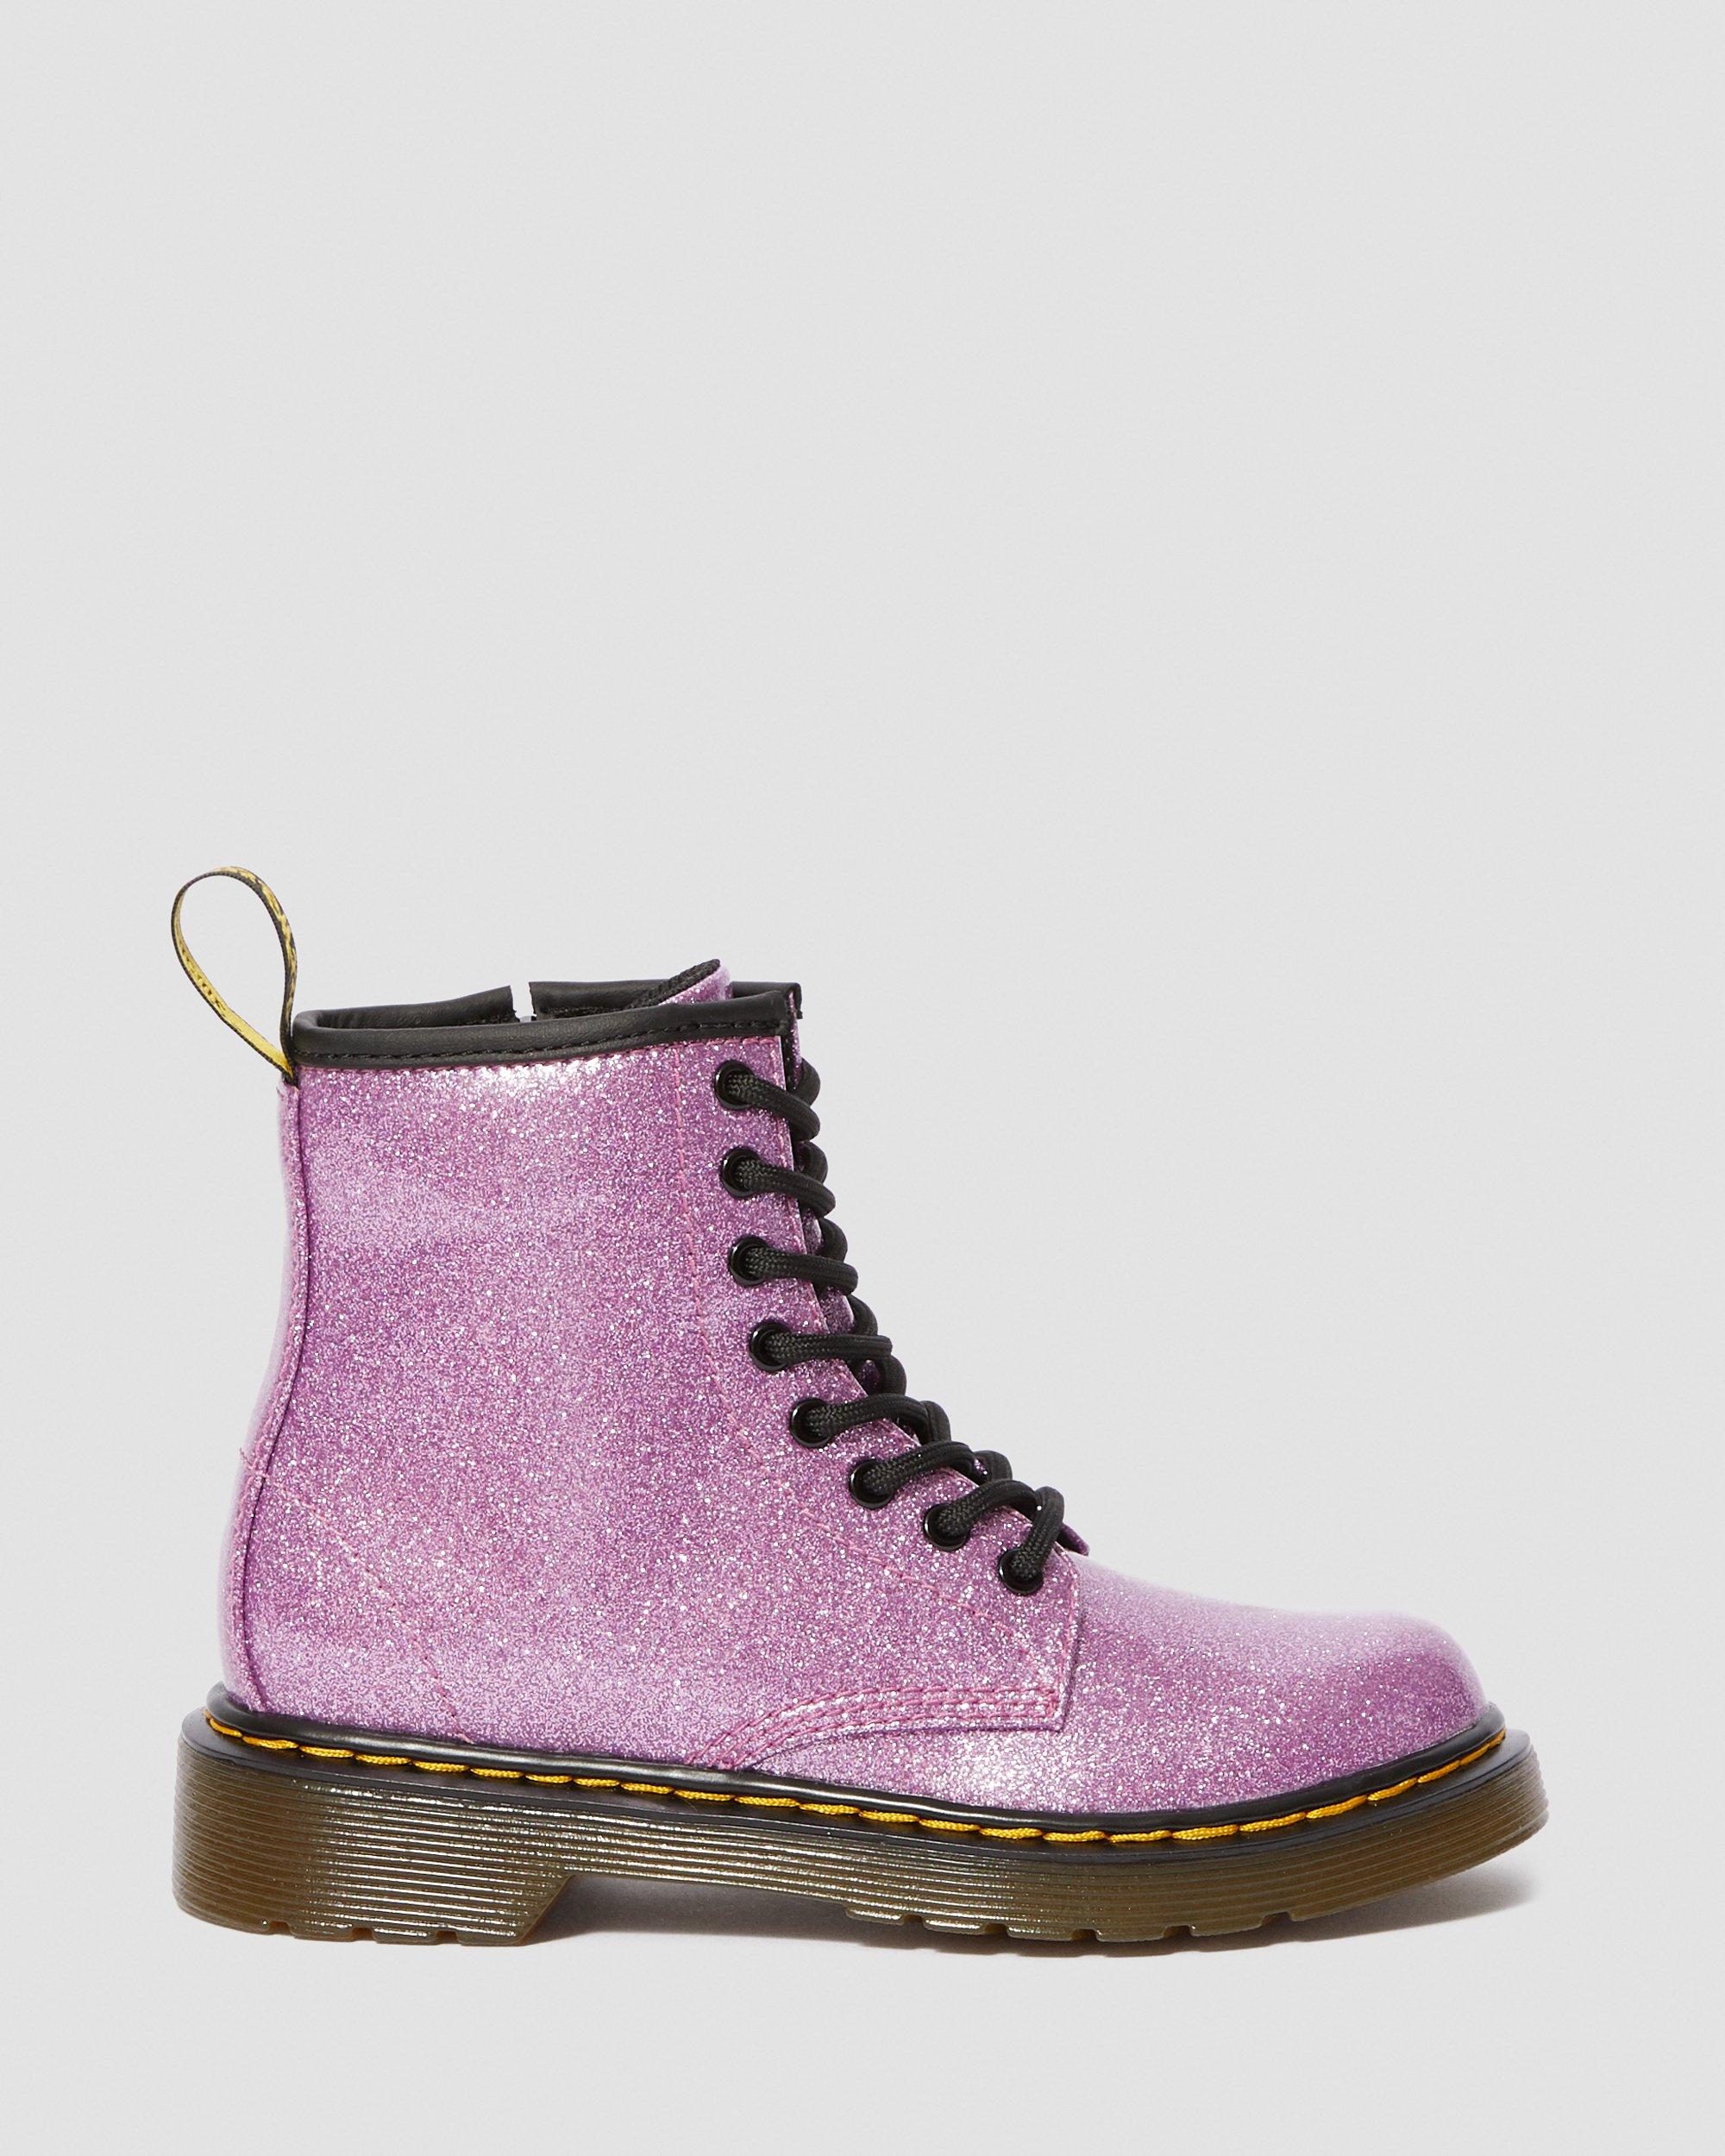 Junior Pink Up Dark | Glitter Martens Boots Lace in Dr. 1460